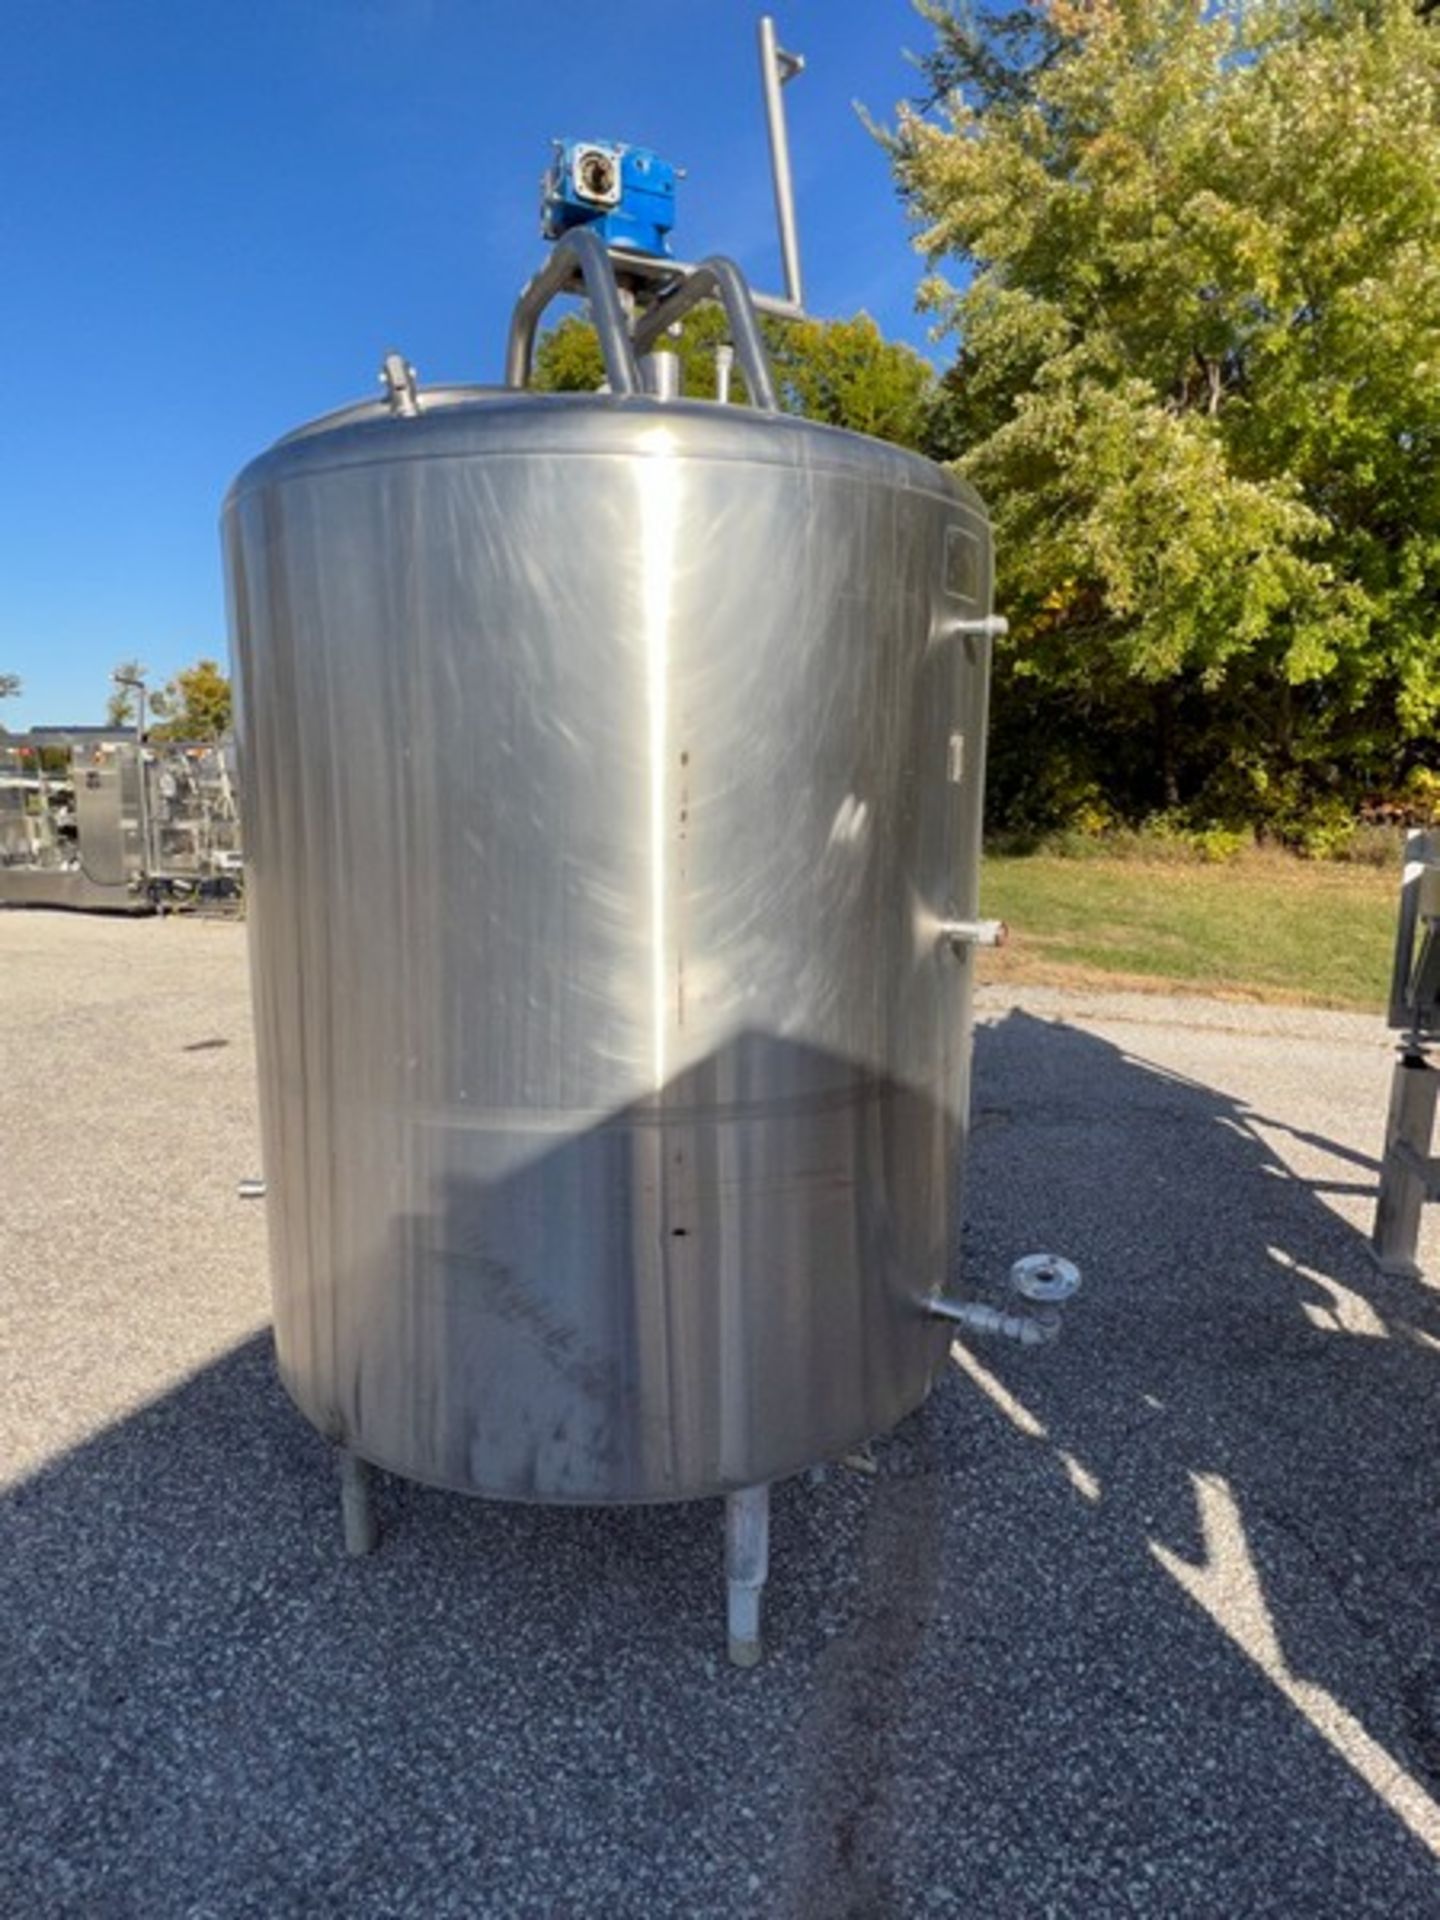 VERTICAL S/S JACKETED AND INSULATED DOME-TOP/SLOPED-BOTTOM TANK, S/ N 97-1223, CERTIFIED BY